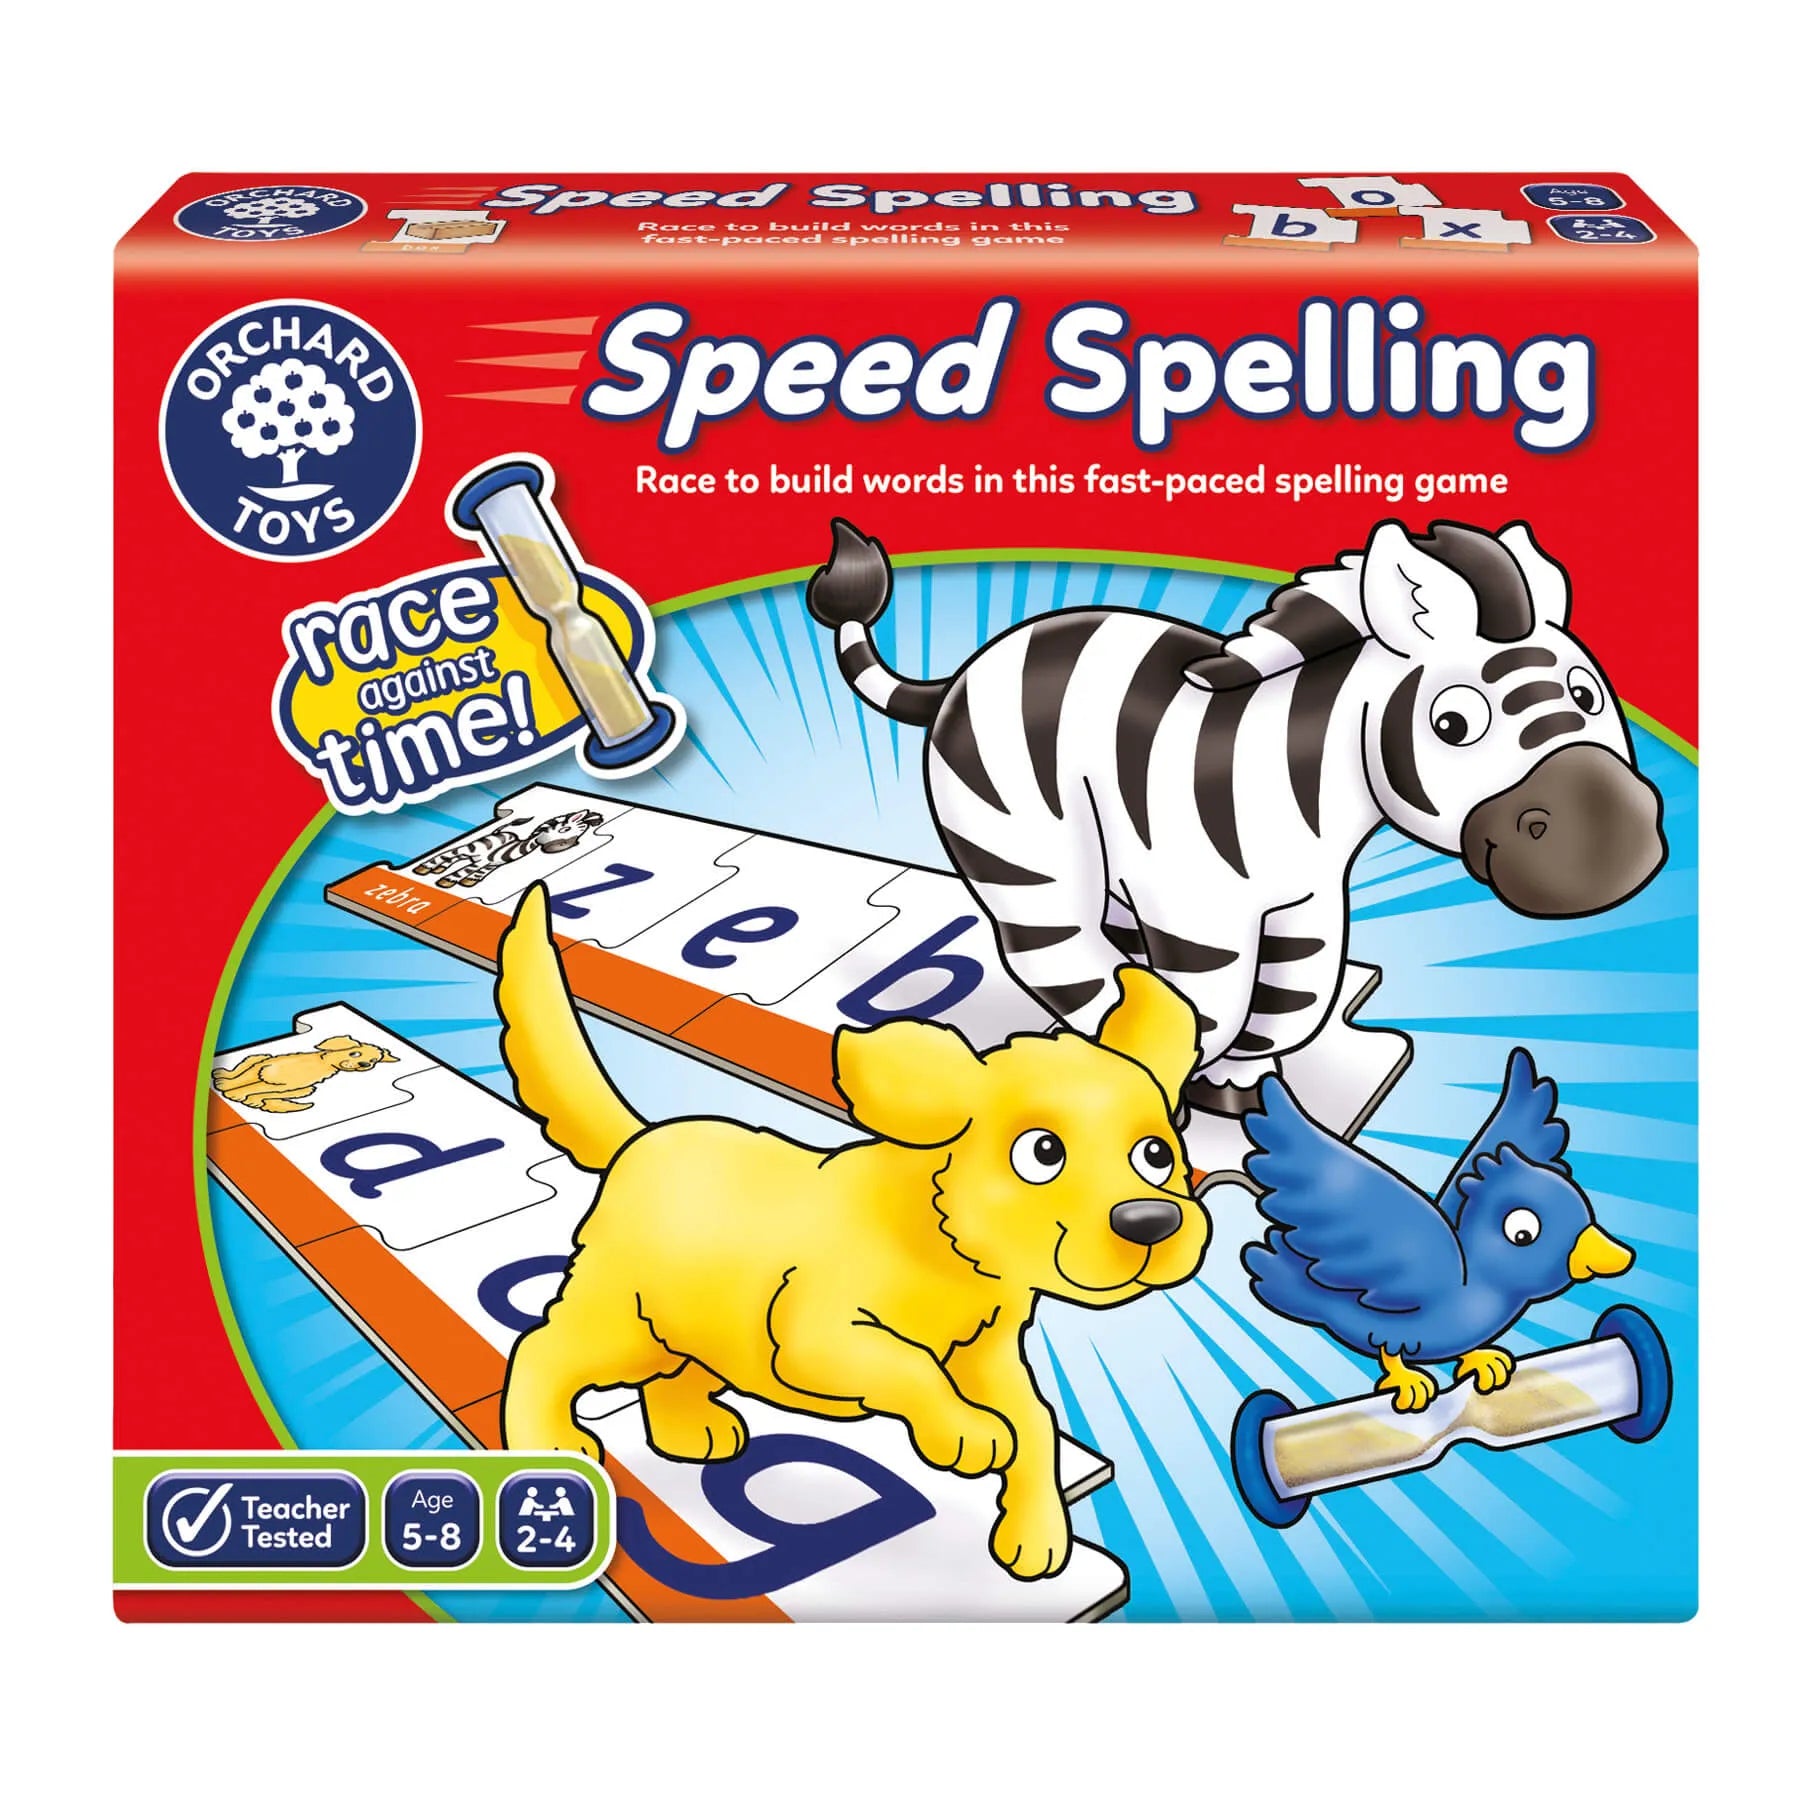 Product with Contents - Speed Spelling